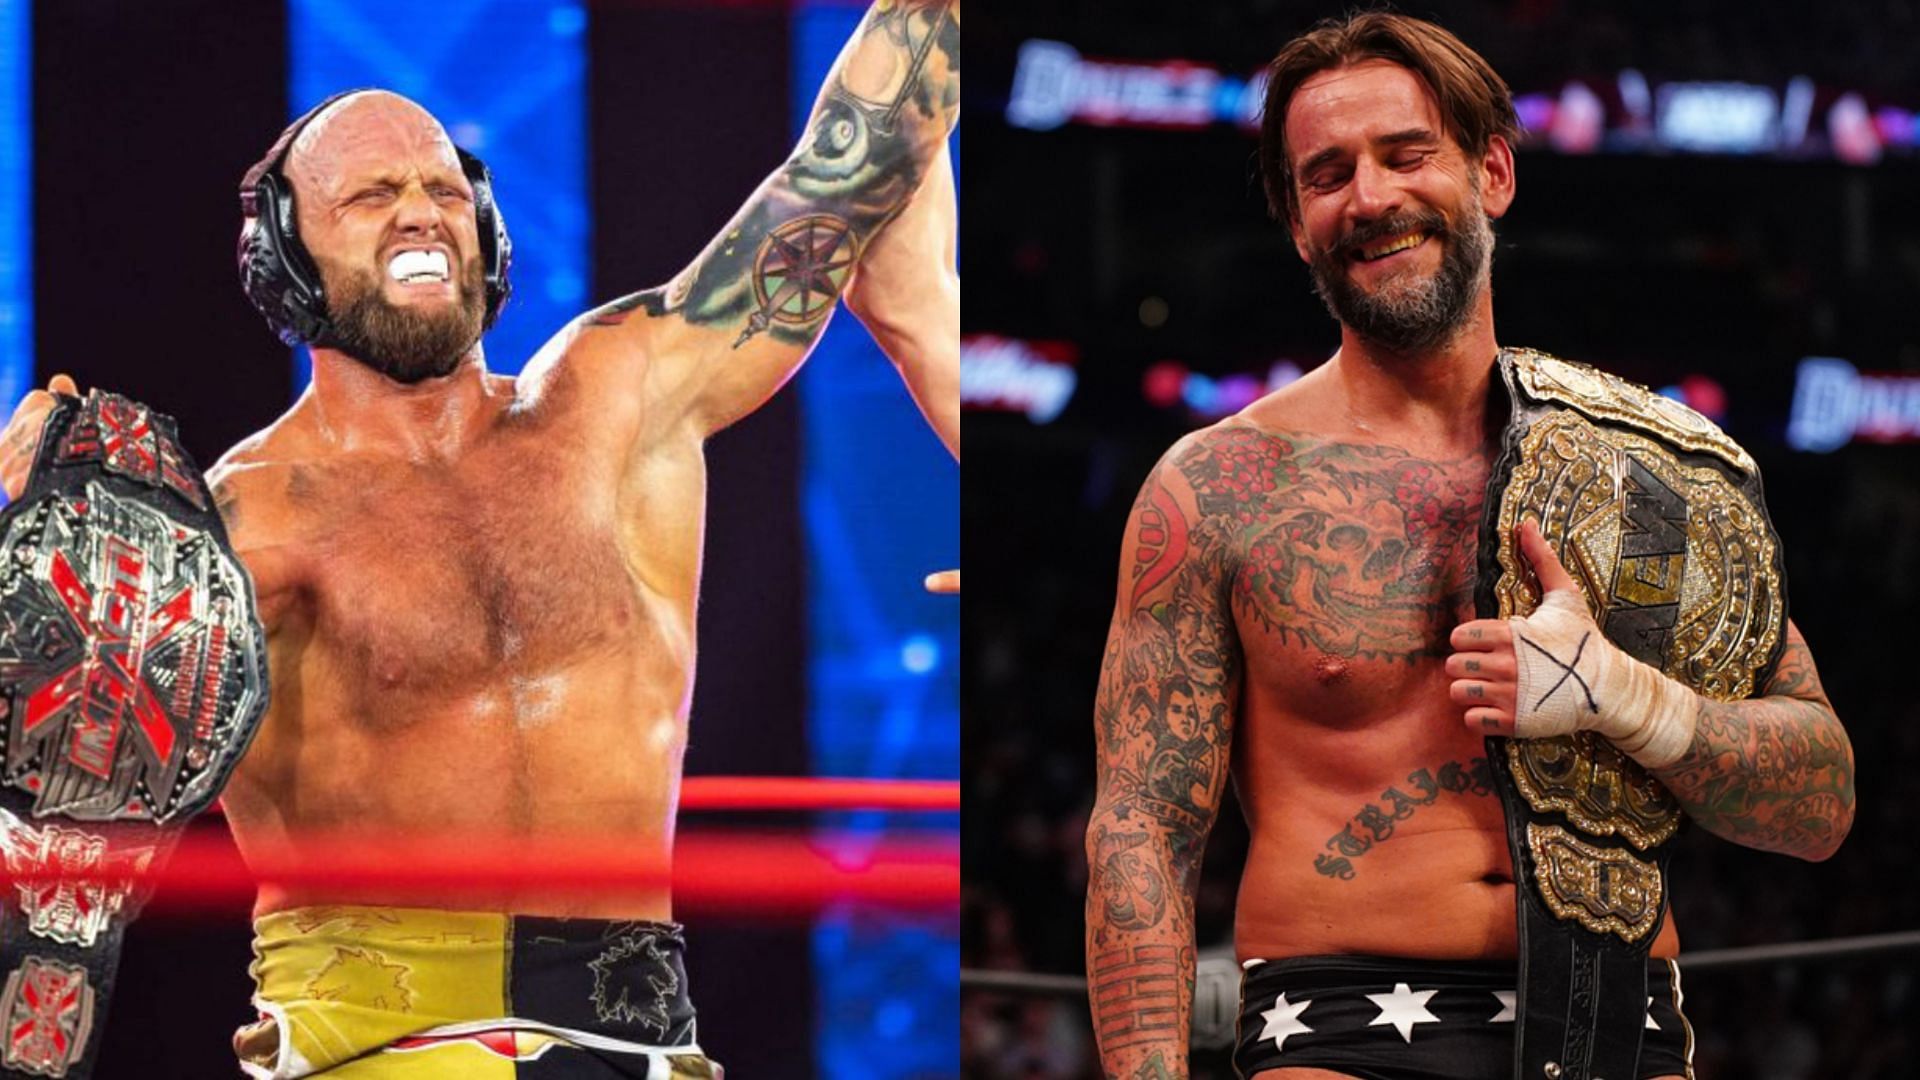 Would the IMPACT Wrestling locker room welcome CM Punk?